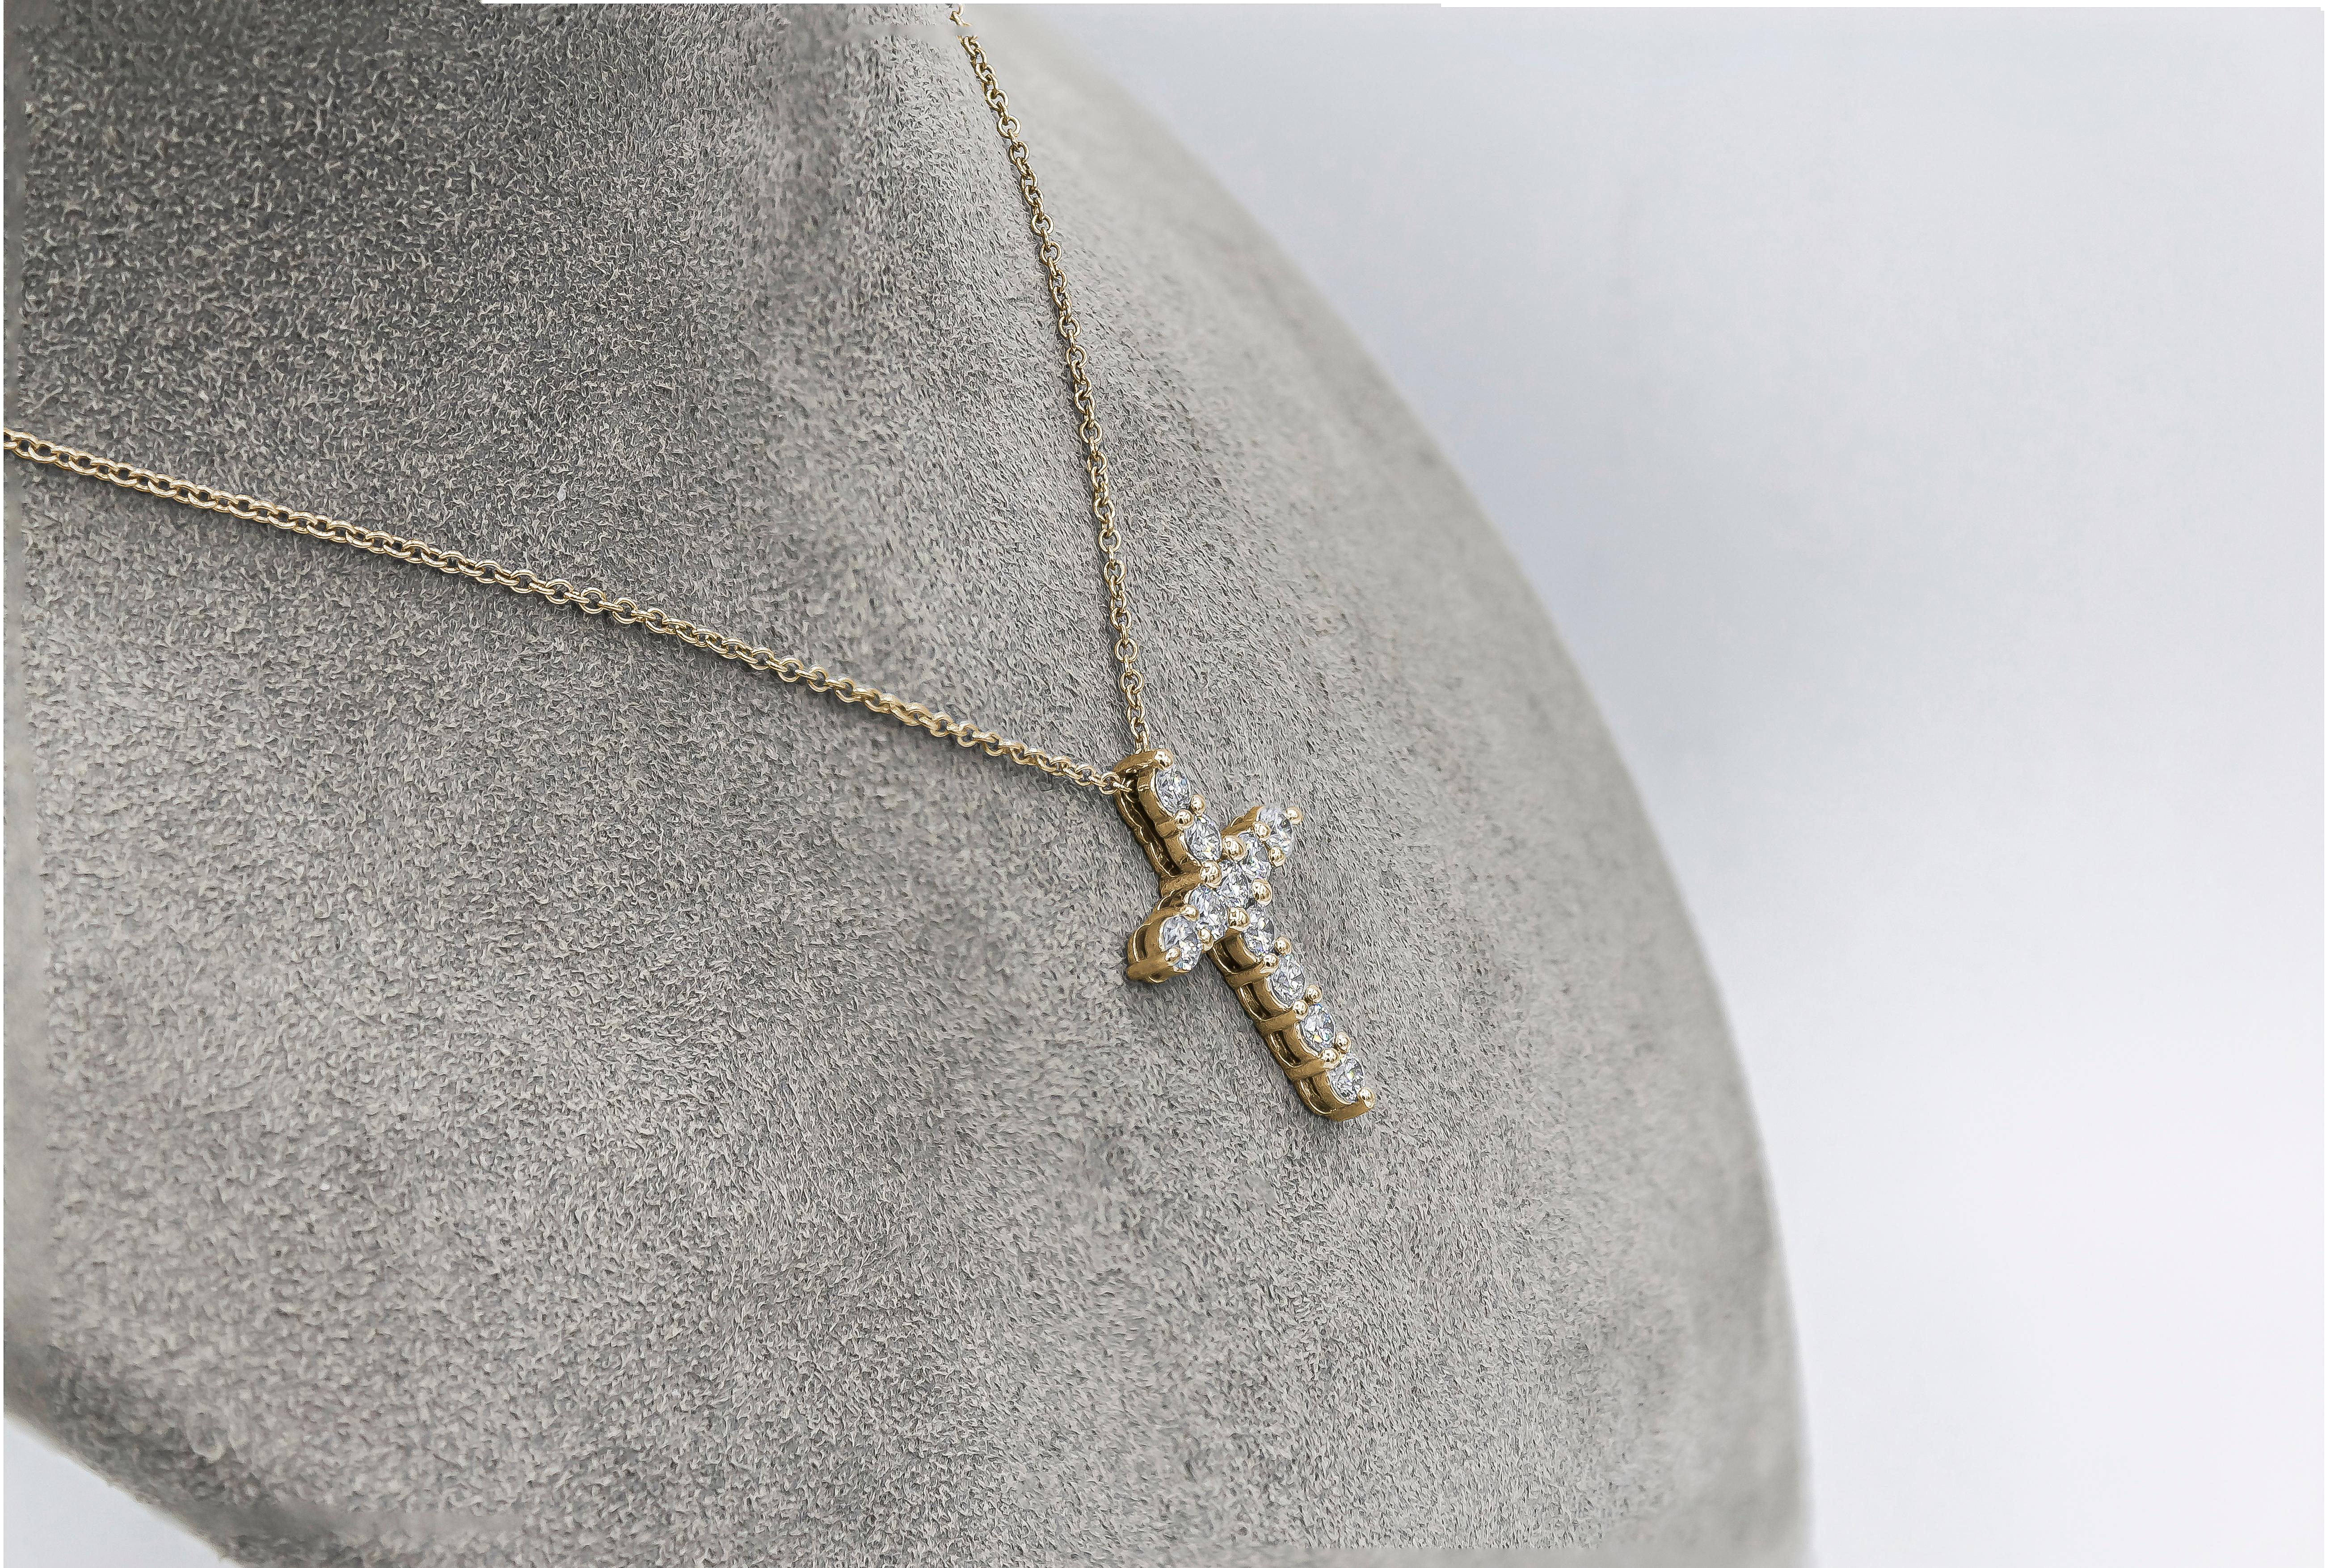 A classic cross pendant necklace set with round brilliant diamonds weighing 1.56 carats total. Diamonds are approximately G color, VS clarity. Made in 14 karat yellow gold.  Suspended in a 16 inch yellow gold chain (adjustable upon request).

Style